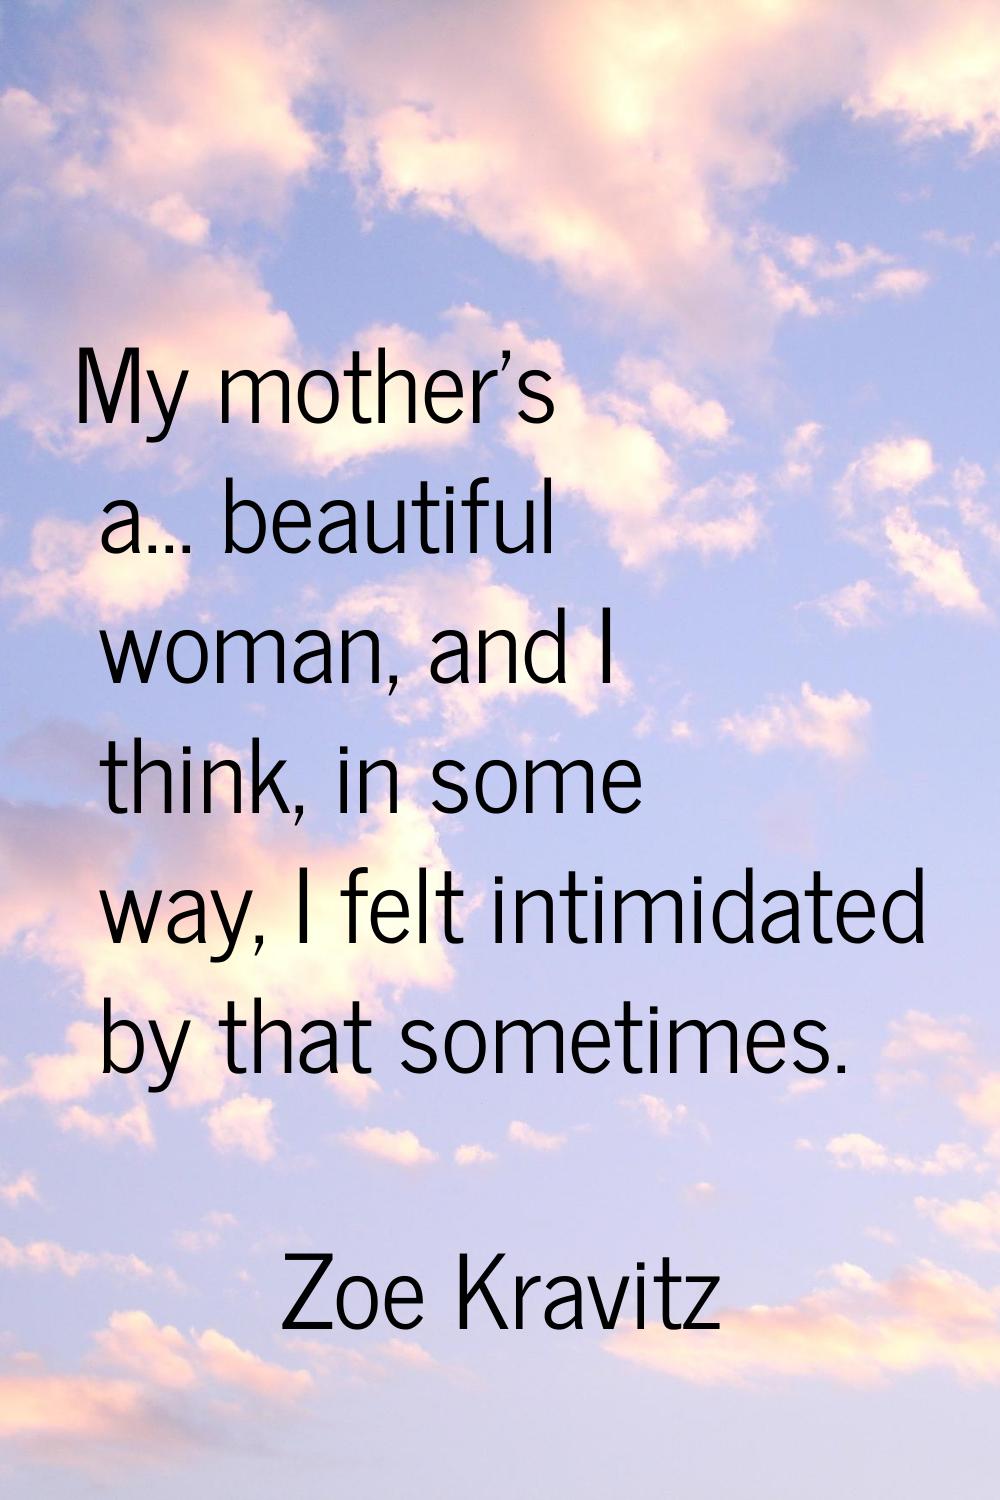 My mother's a... beautiful woman, and I think, in some way, I felt intimidated by that sometimes.